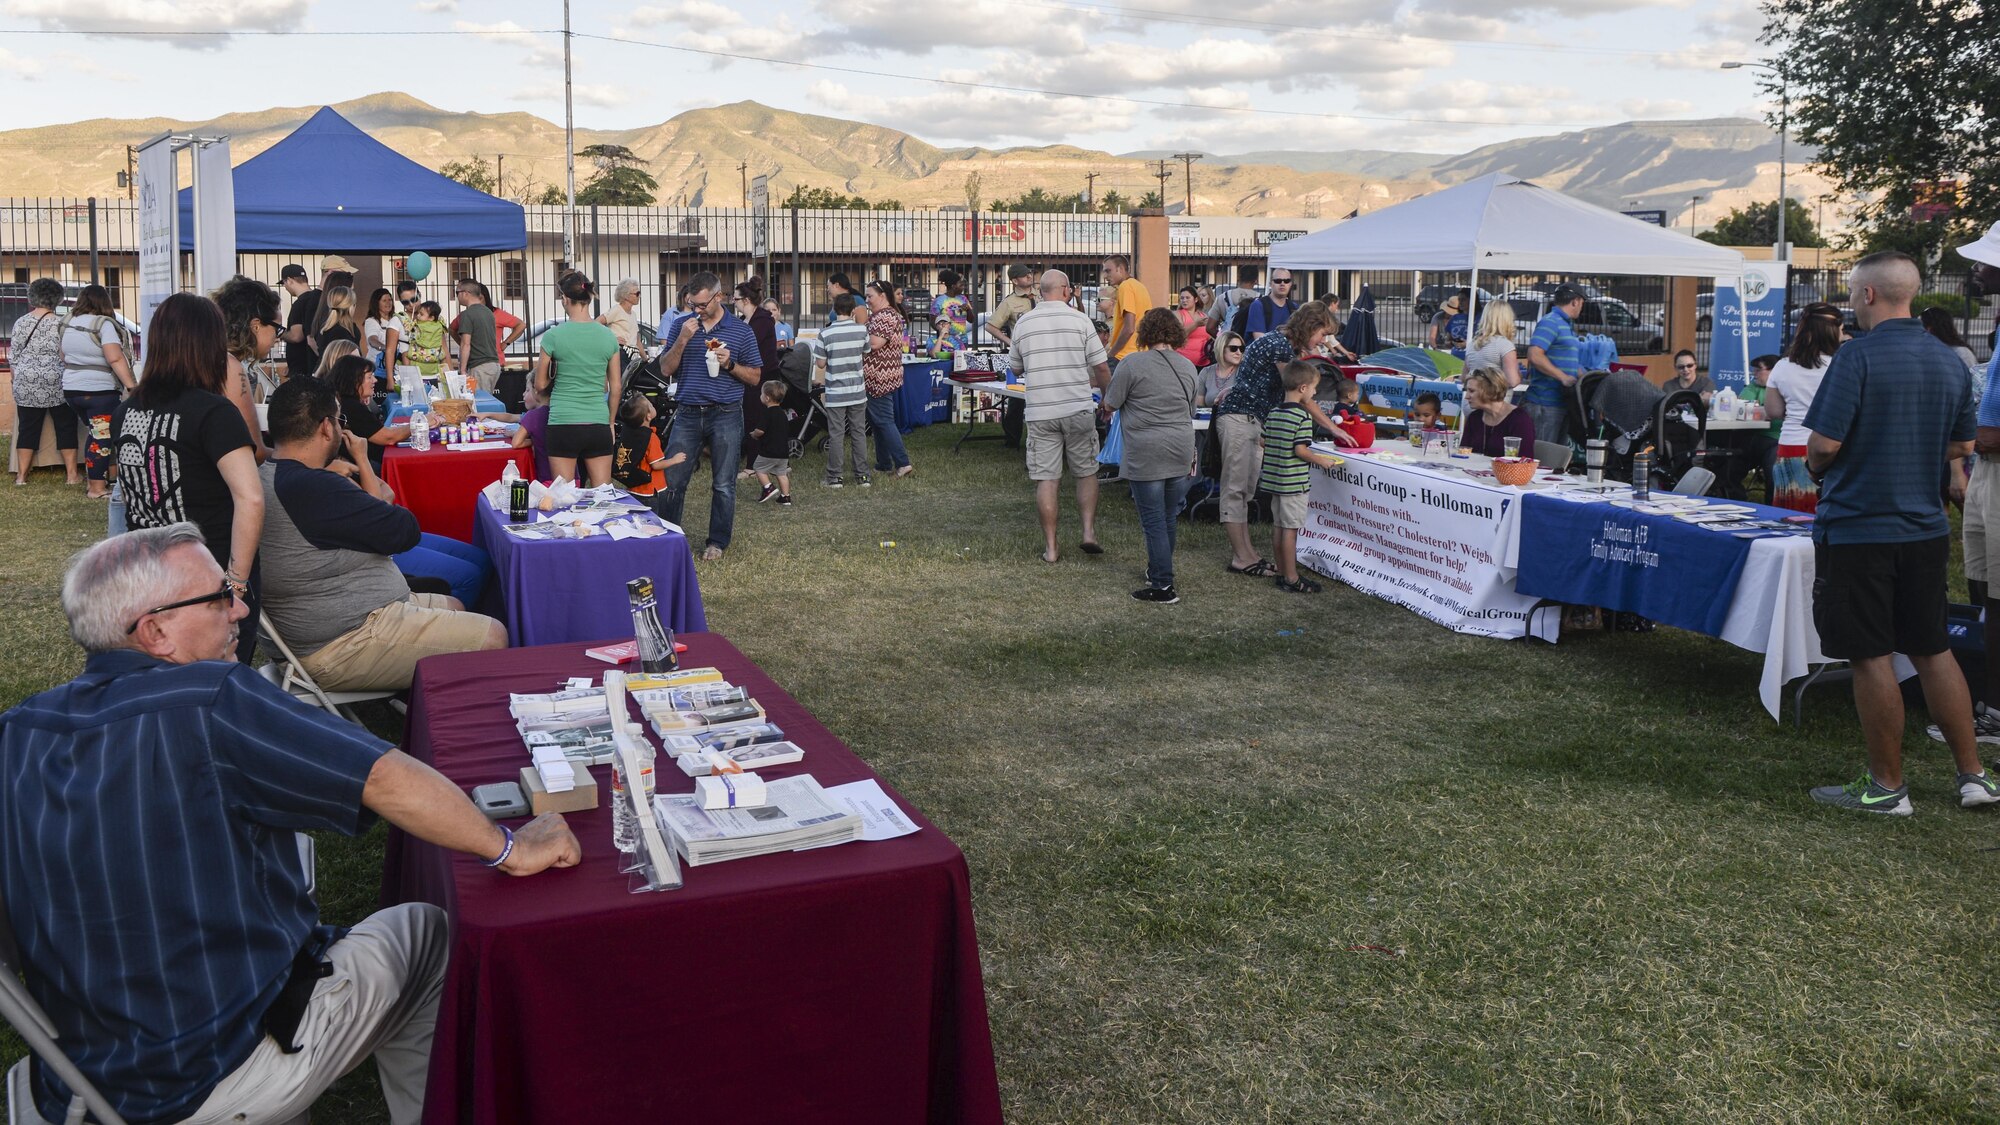 Members from various agencies and non-profit organizations talk to guests at the annual Zoo After Hours event at Alameda Park Zoo in Alamogordo, N.M. on Sept. 24, 2016. The event was open to all active duty military personnel and their families. (U.S. Air Force photo by Airman 1st Class Alexis P. Docherty) 